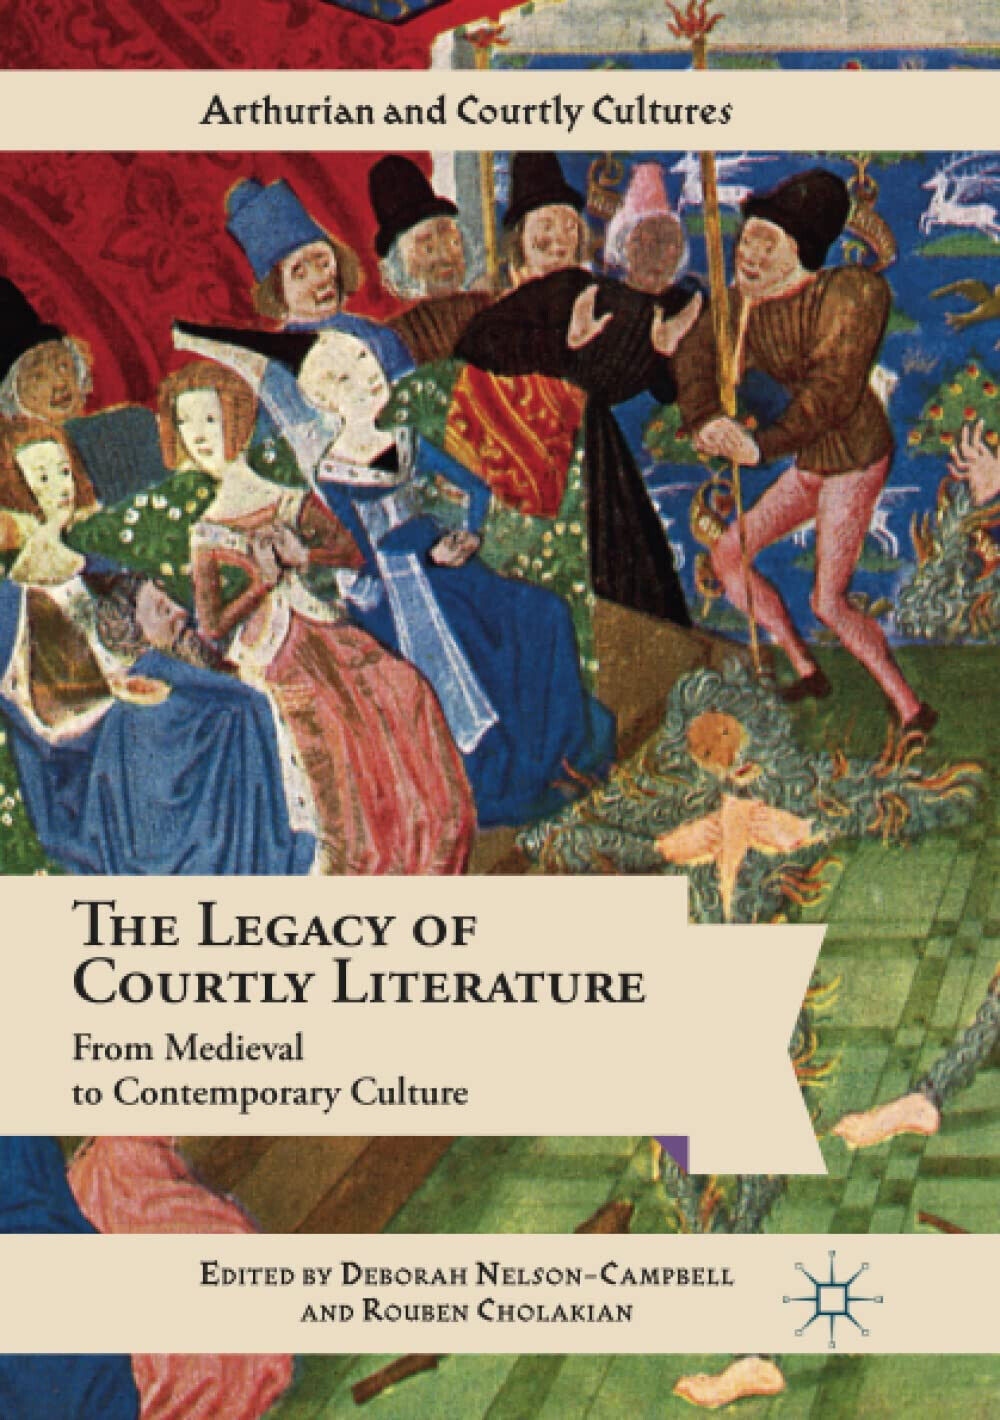 The Legacy of Courtly Literature - Deborah Nelson-Campbell - Palgrave, 2018 libro usato